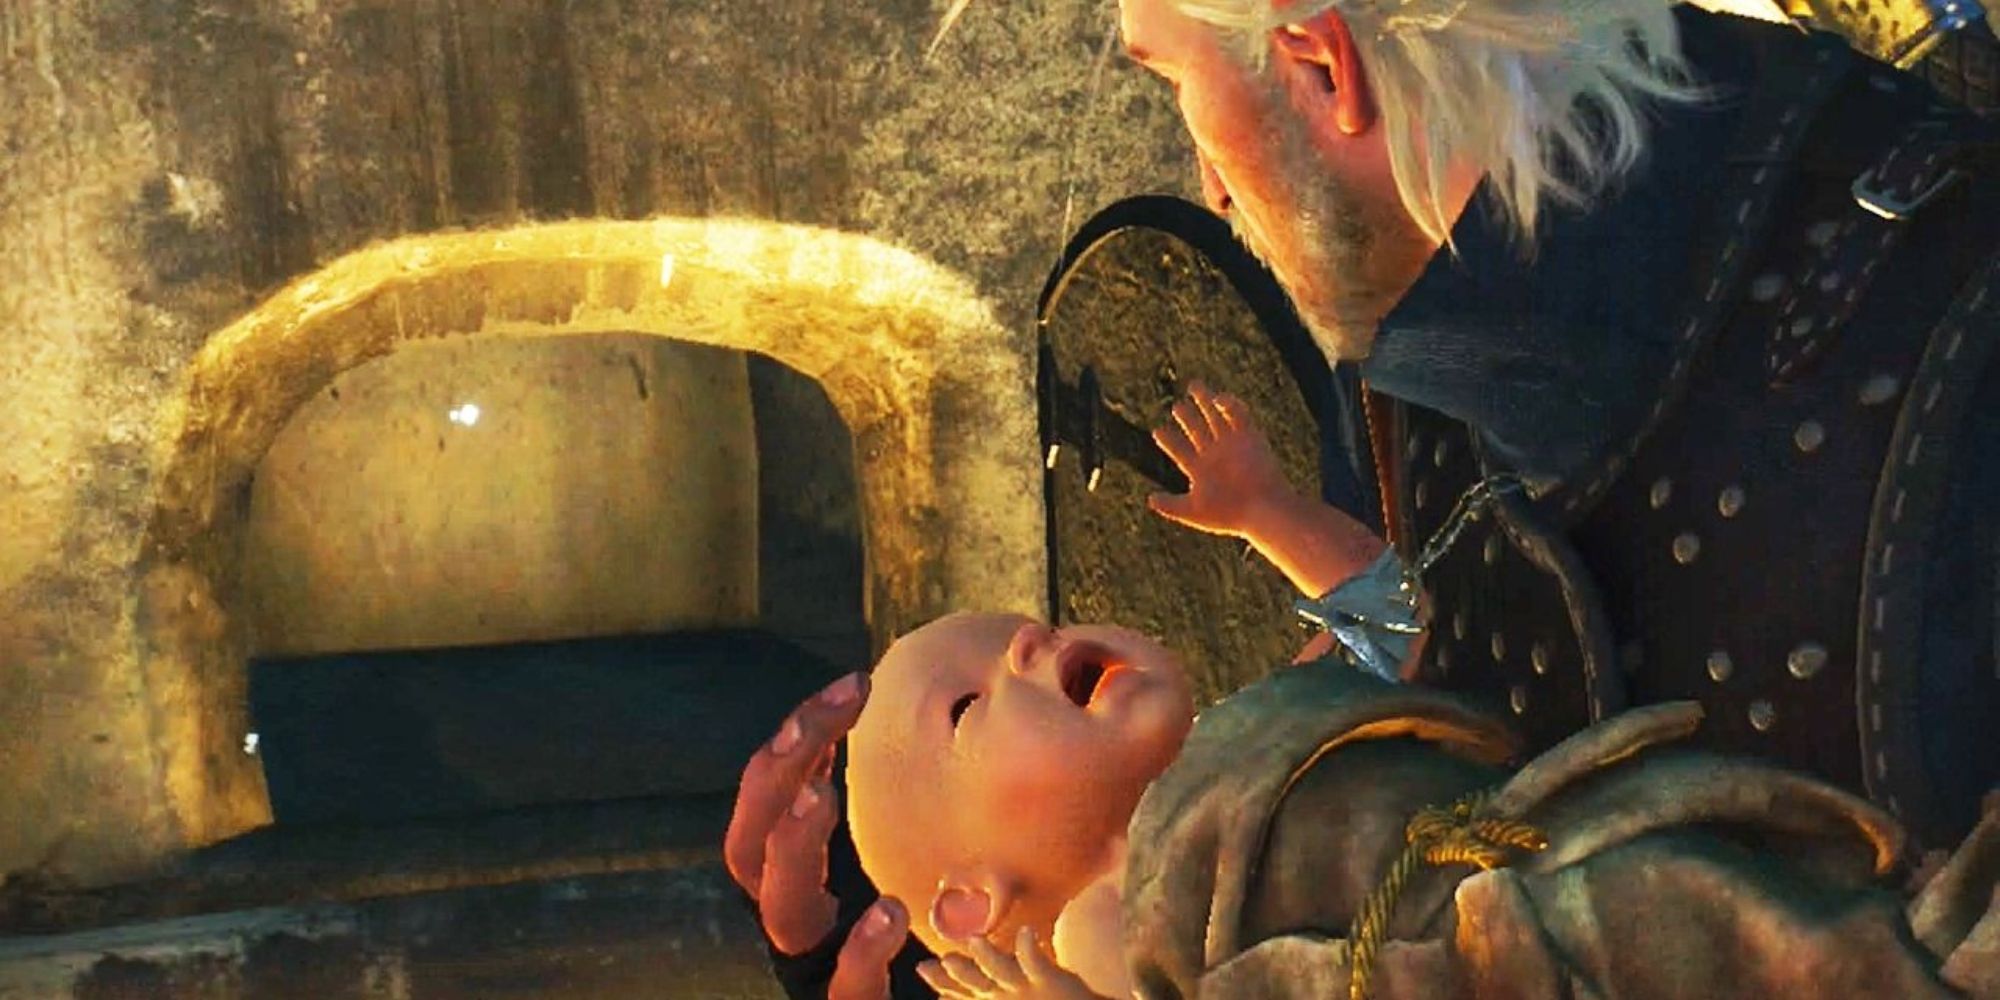 Witcher 3 Screenshot Of Geralt Putting Baby In Oven